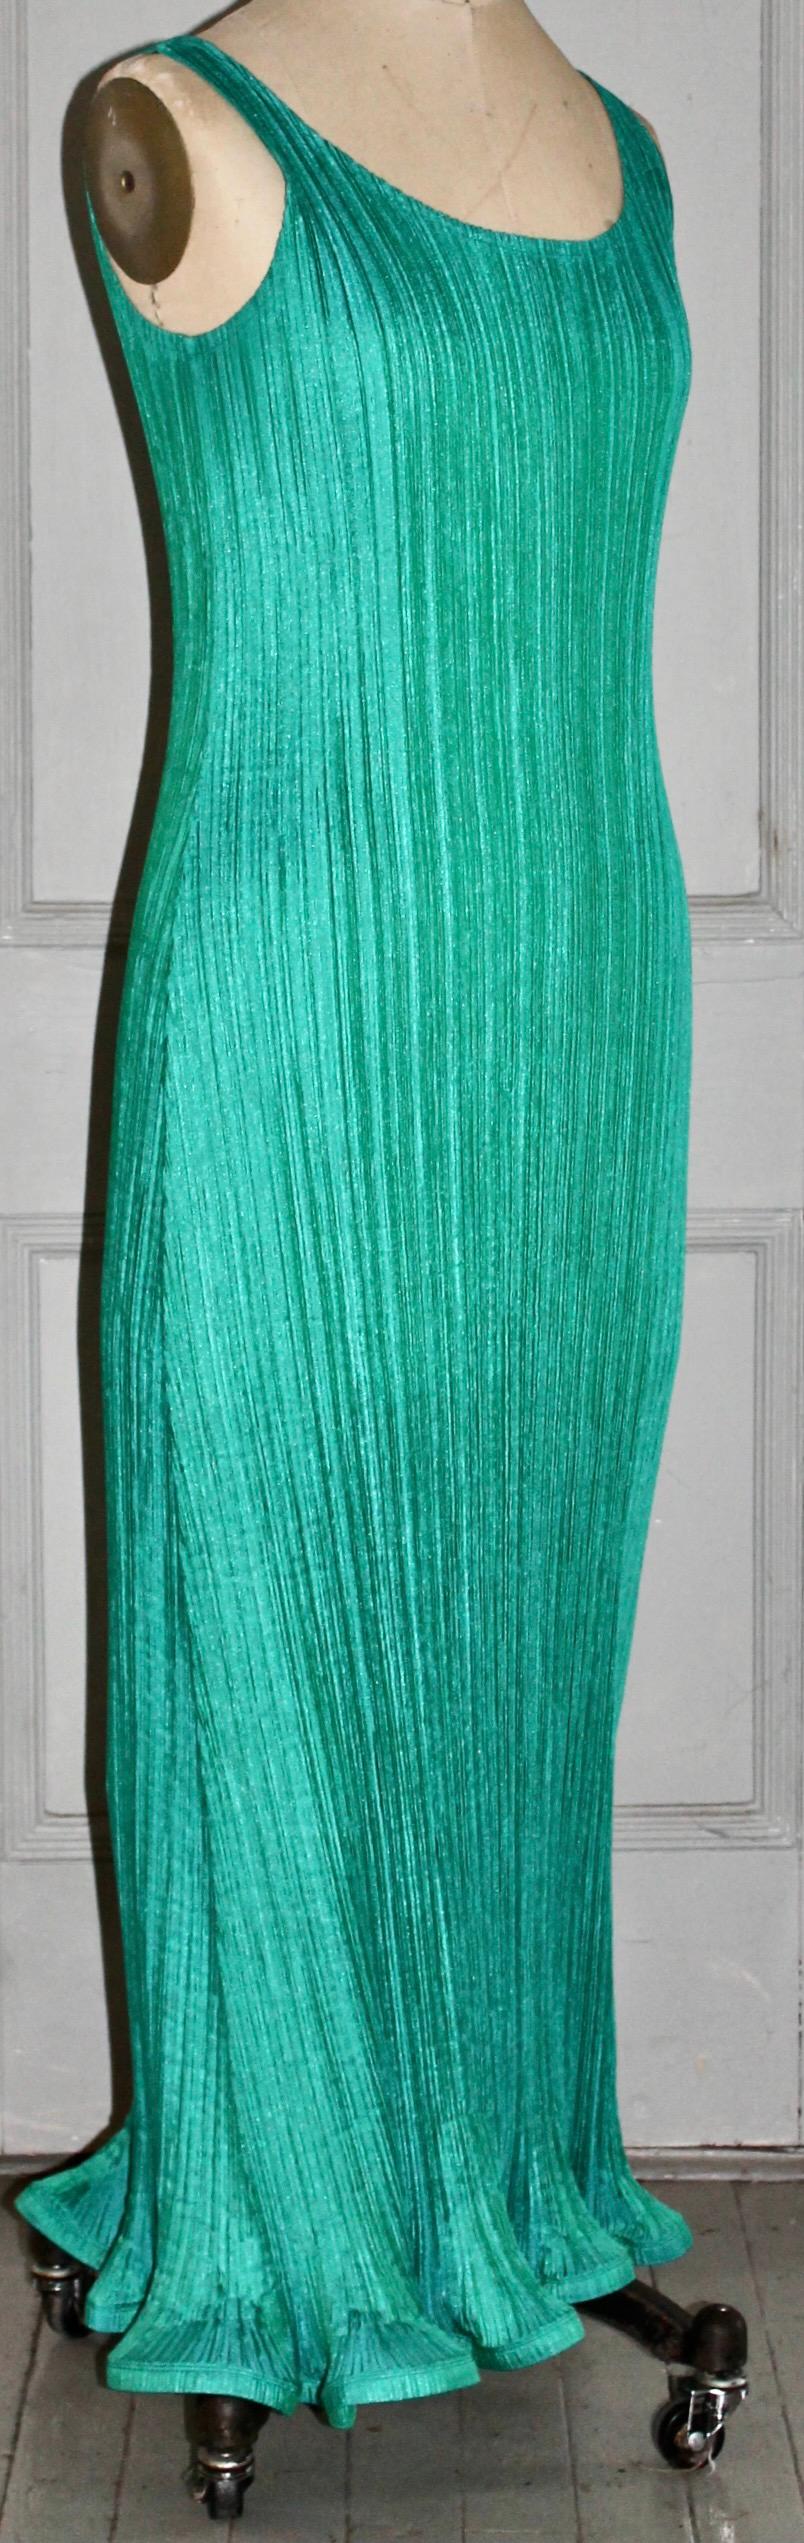 Issey Miyake 1990's Pleated Sculptural Dress and Overtop For Sale 5